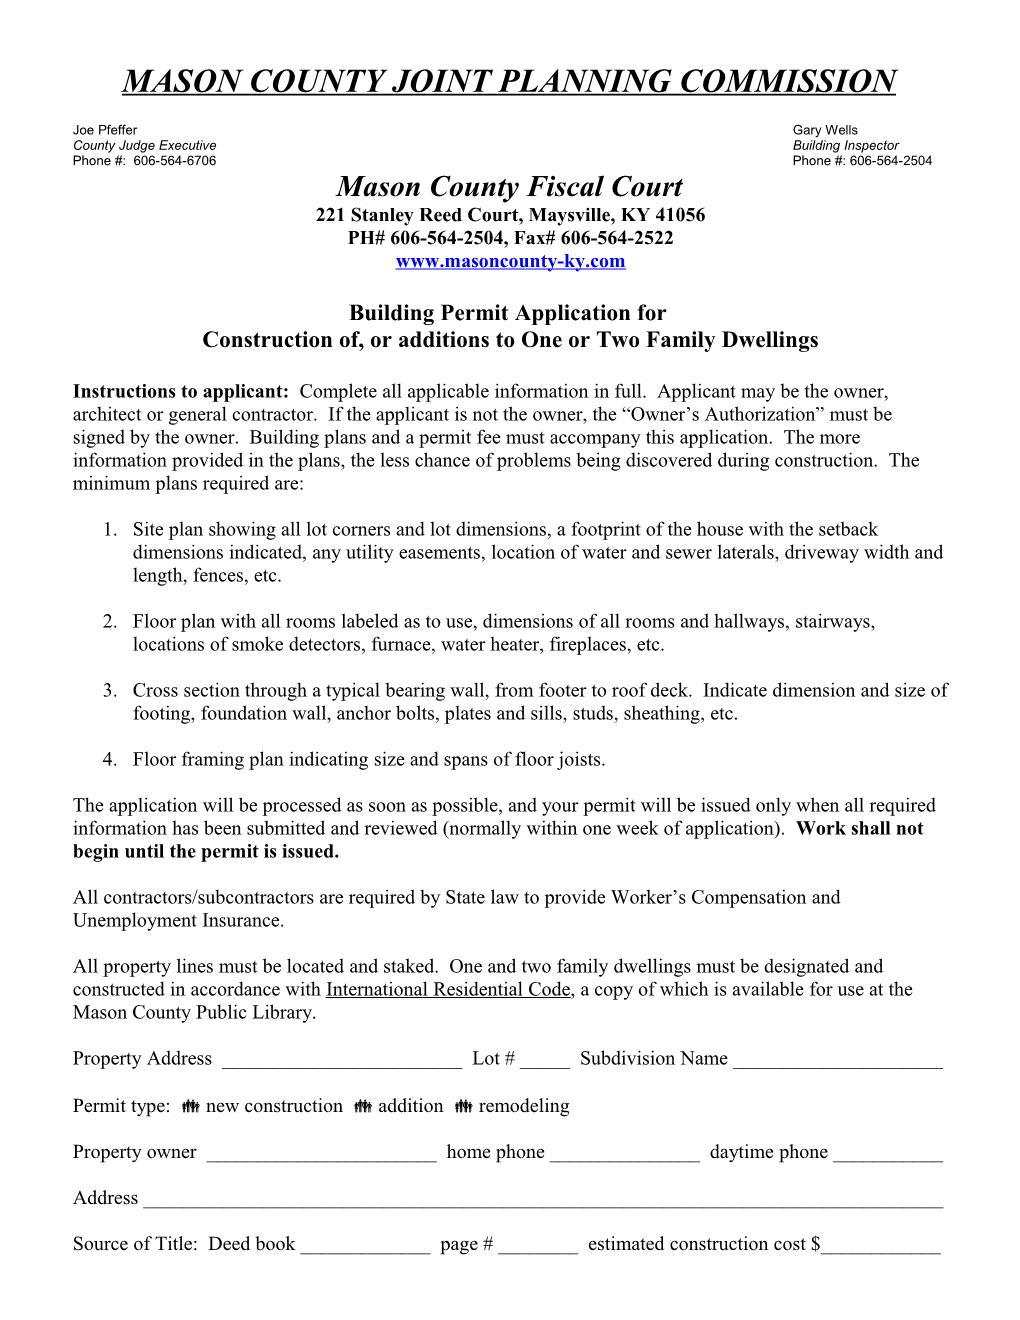 Mason County Joint Planning Commission